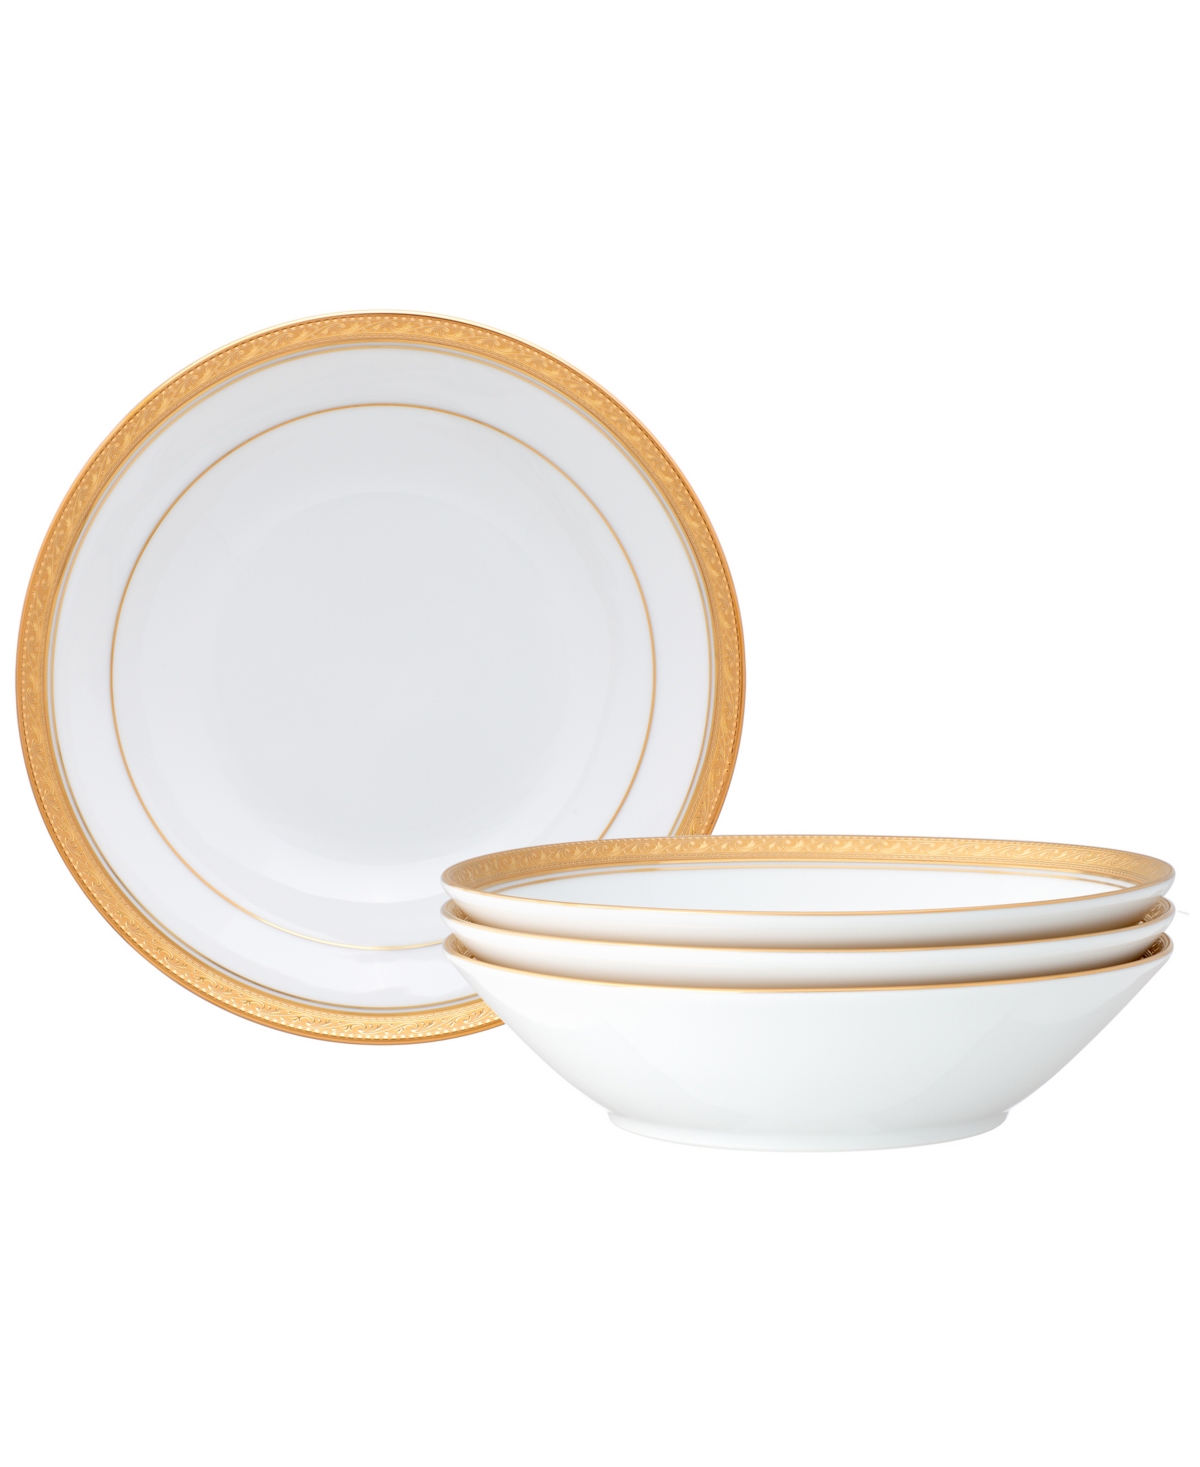 Noritake Crestwood Gold Set Of 4 Soup Bowls, Service For 4 In White